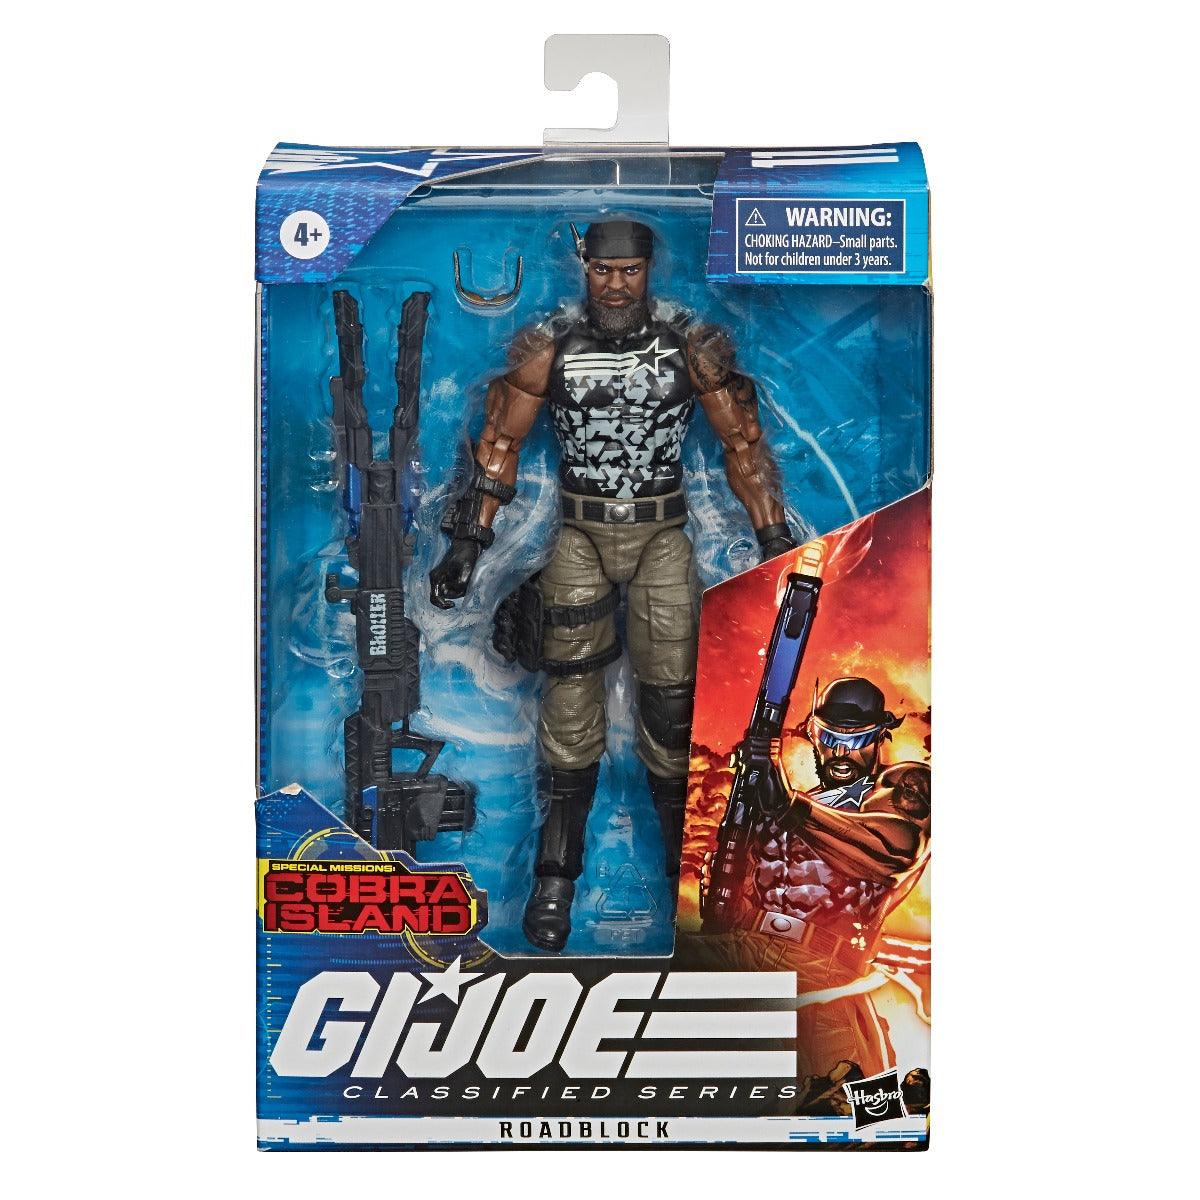 G.I. Joe Classified Series Special Missions: Cobra Island Roadblock Action Figure 11 Premium Toy 6-Inch Scale with Custom Package Art